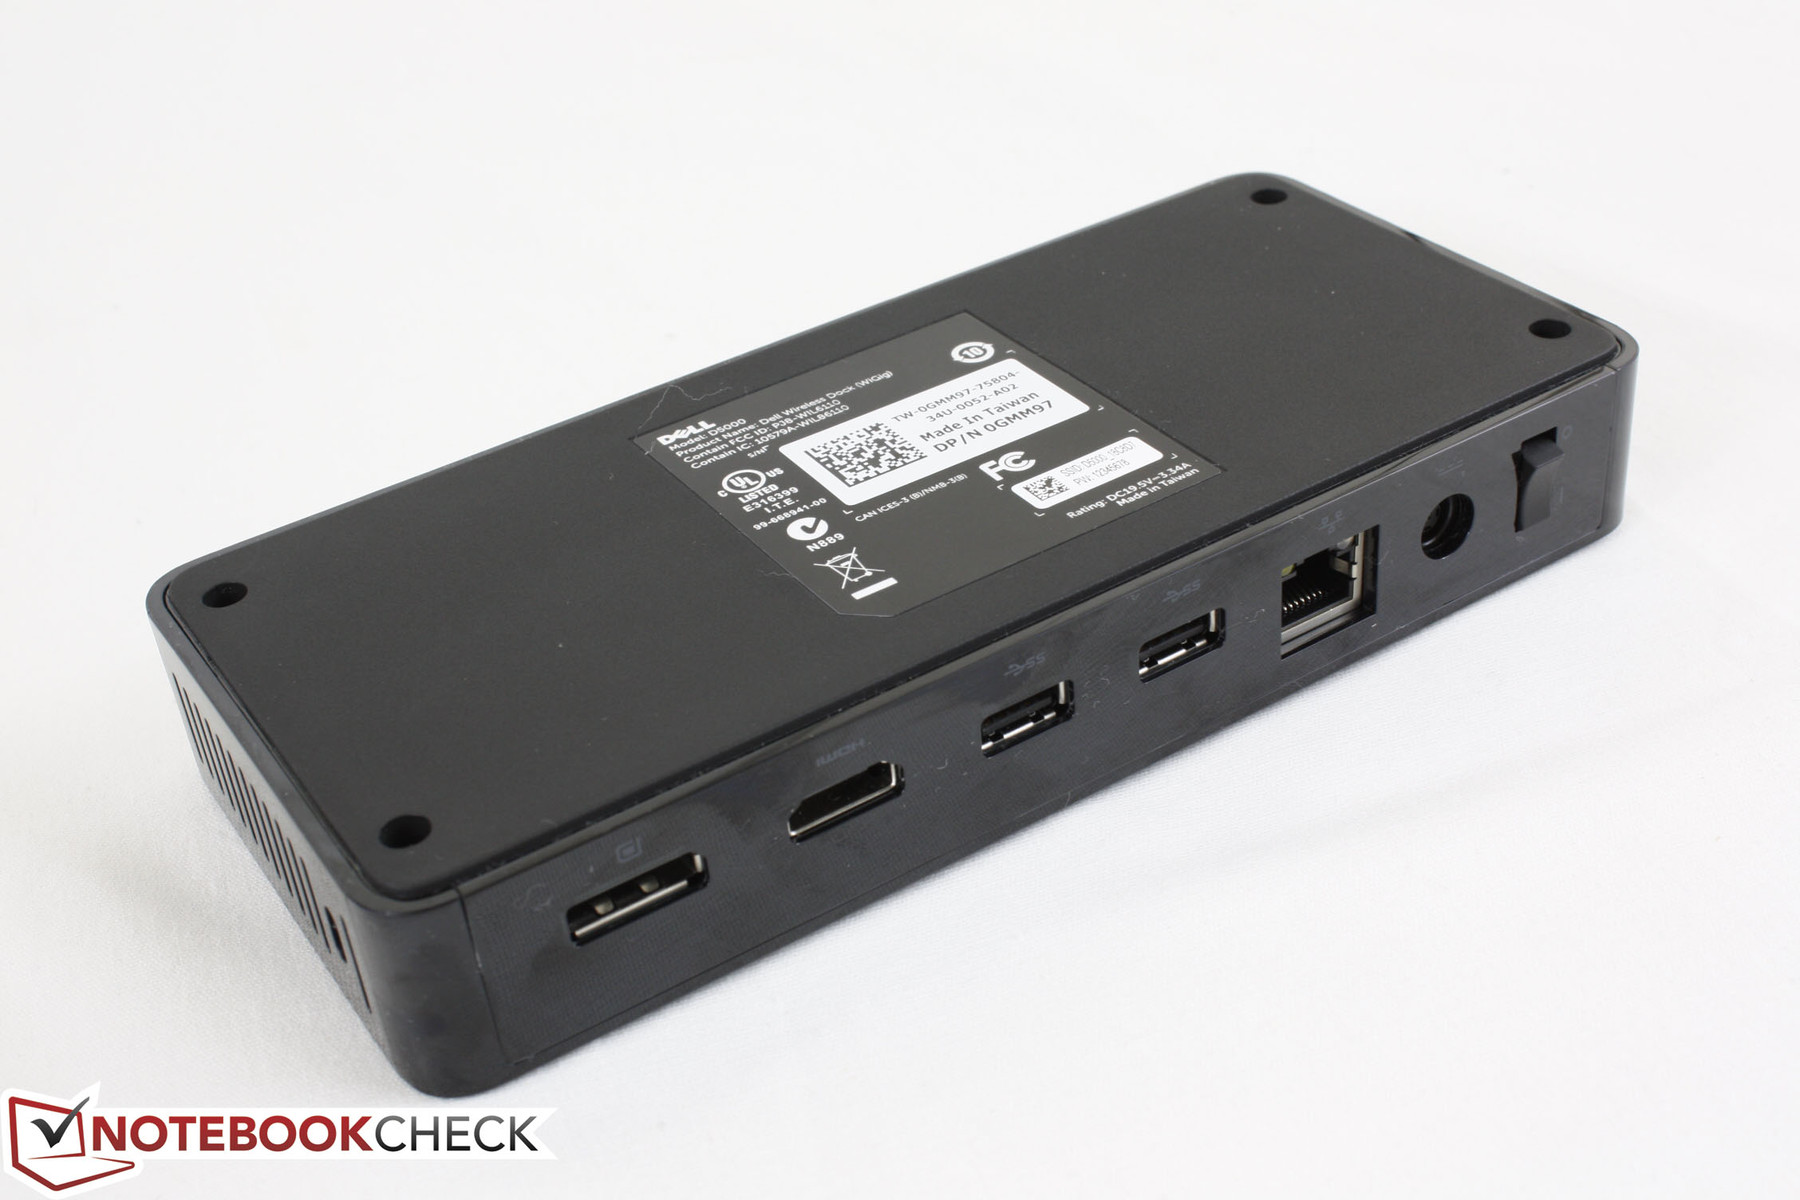 Dell Wireless Dock D5000 Review